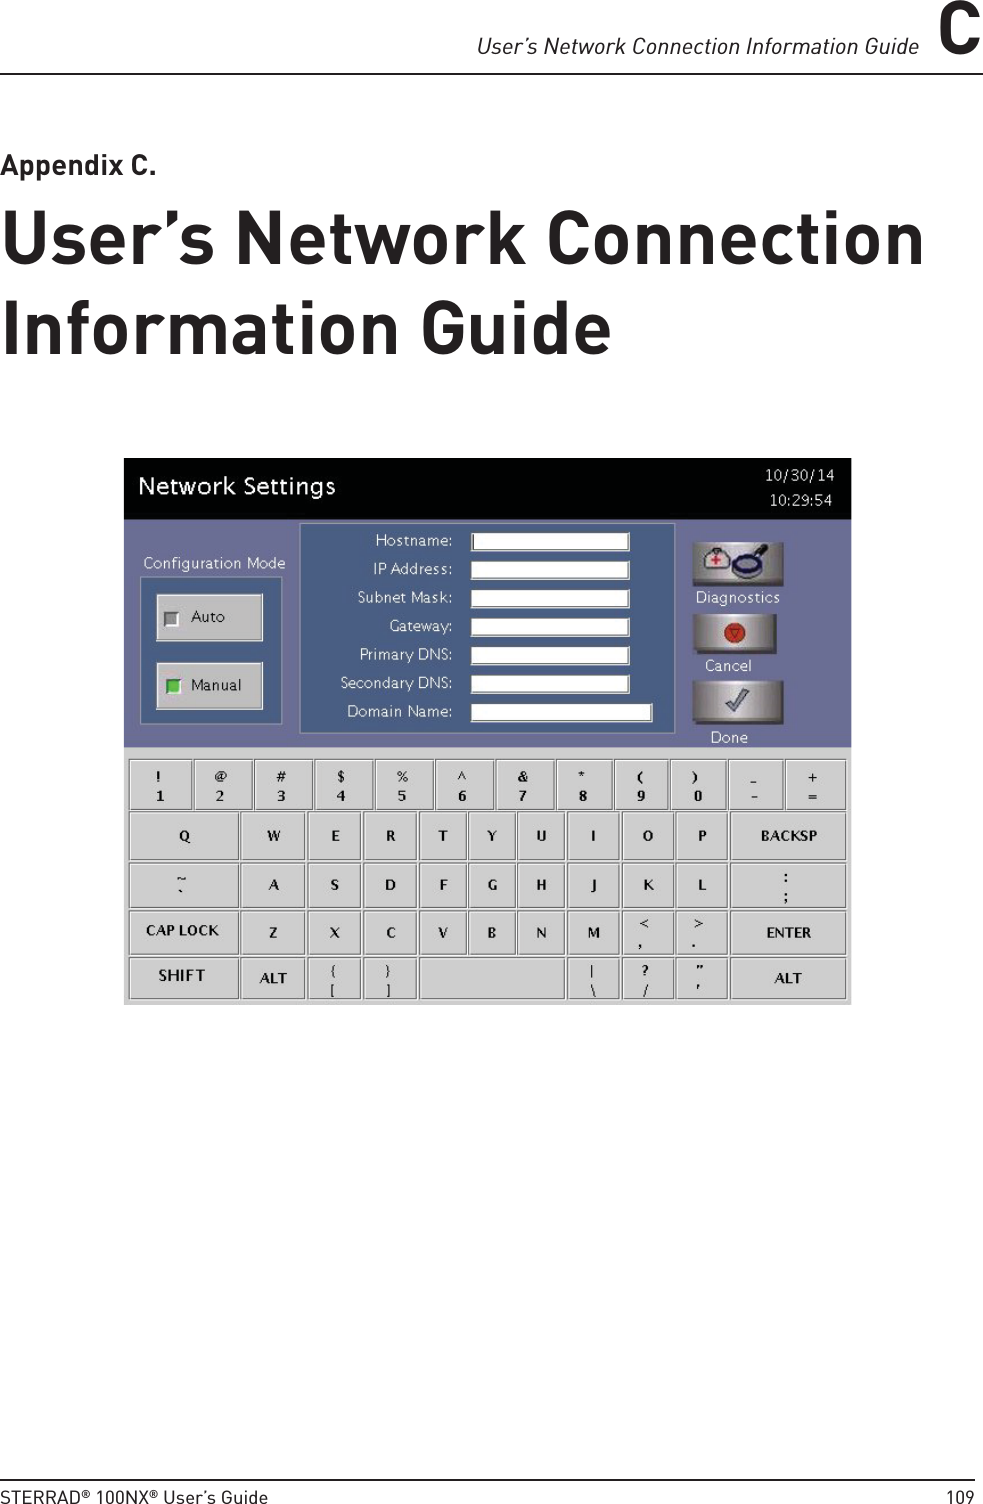 User’s Network Connection Information Guide CSTERRAD® 100NX® User’s Guide  109Appendix C. User’s Network Connection Information GuideUser’s Network Connection Information Guide